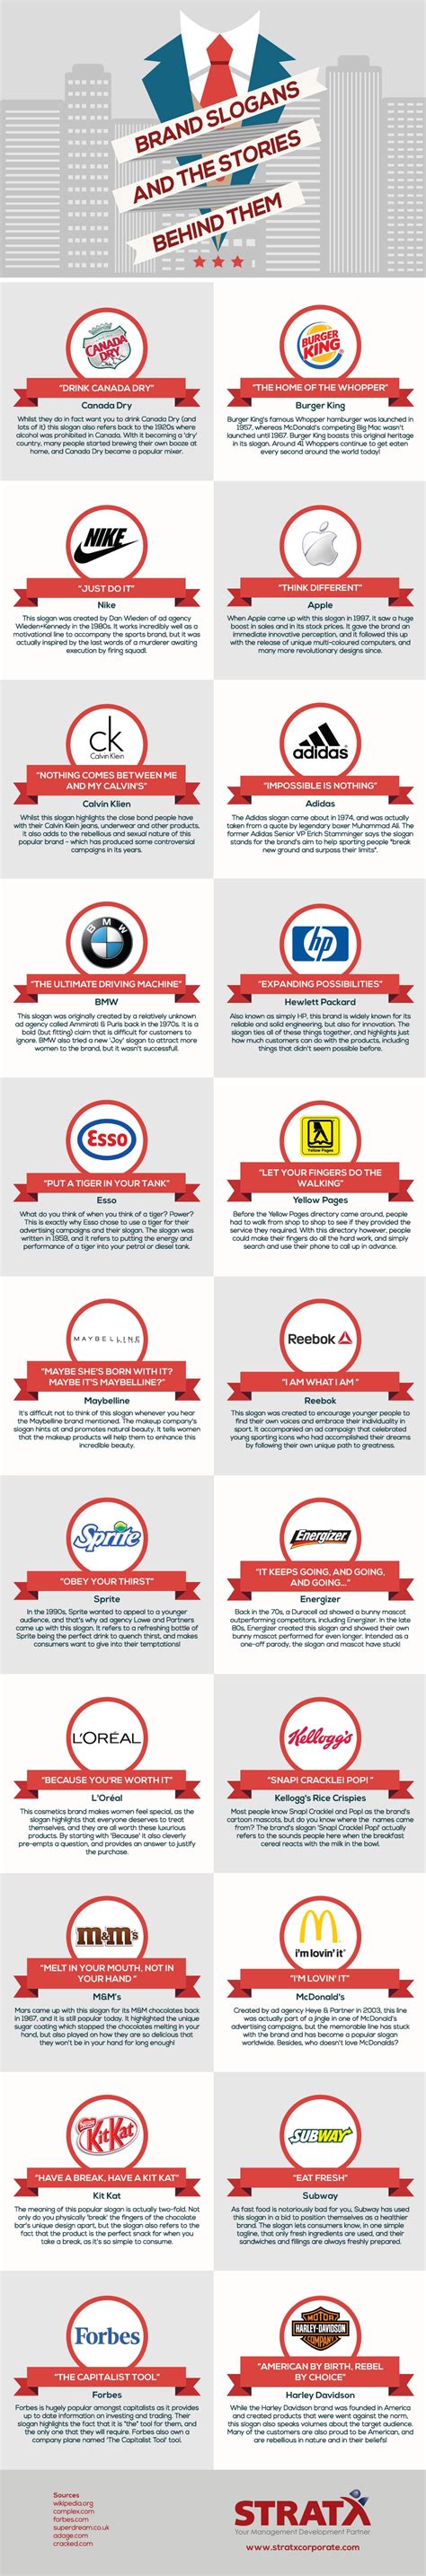 22 Famous Brand Slogans And The Little Known Stories Behind Them [infographic]